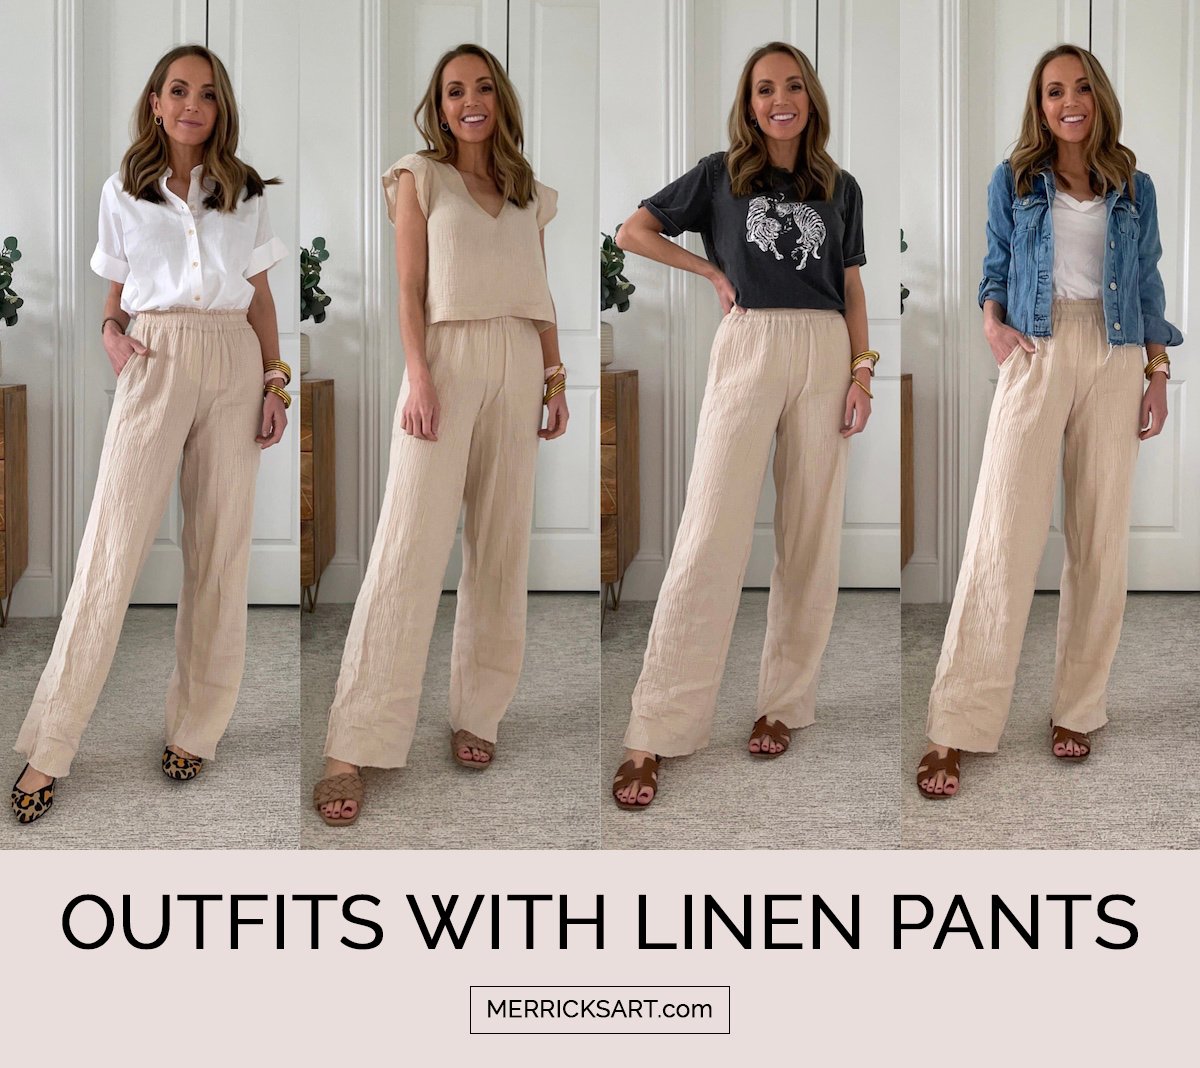 What Do You Wear With Linen Pants?